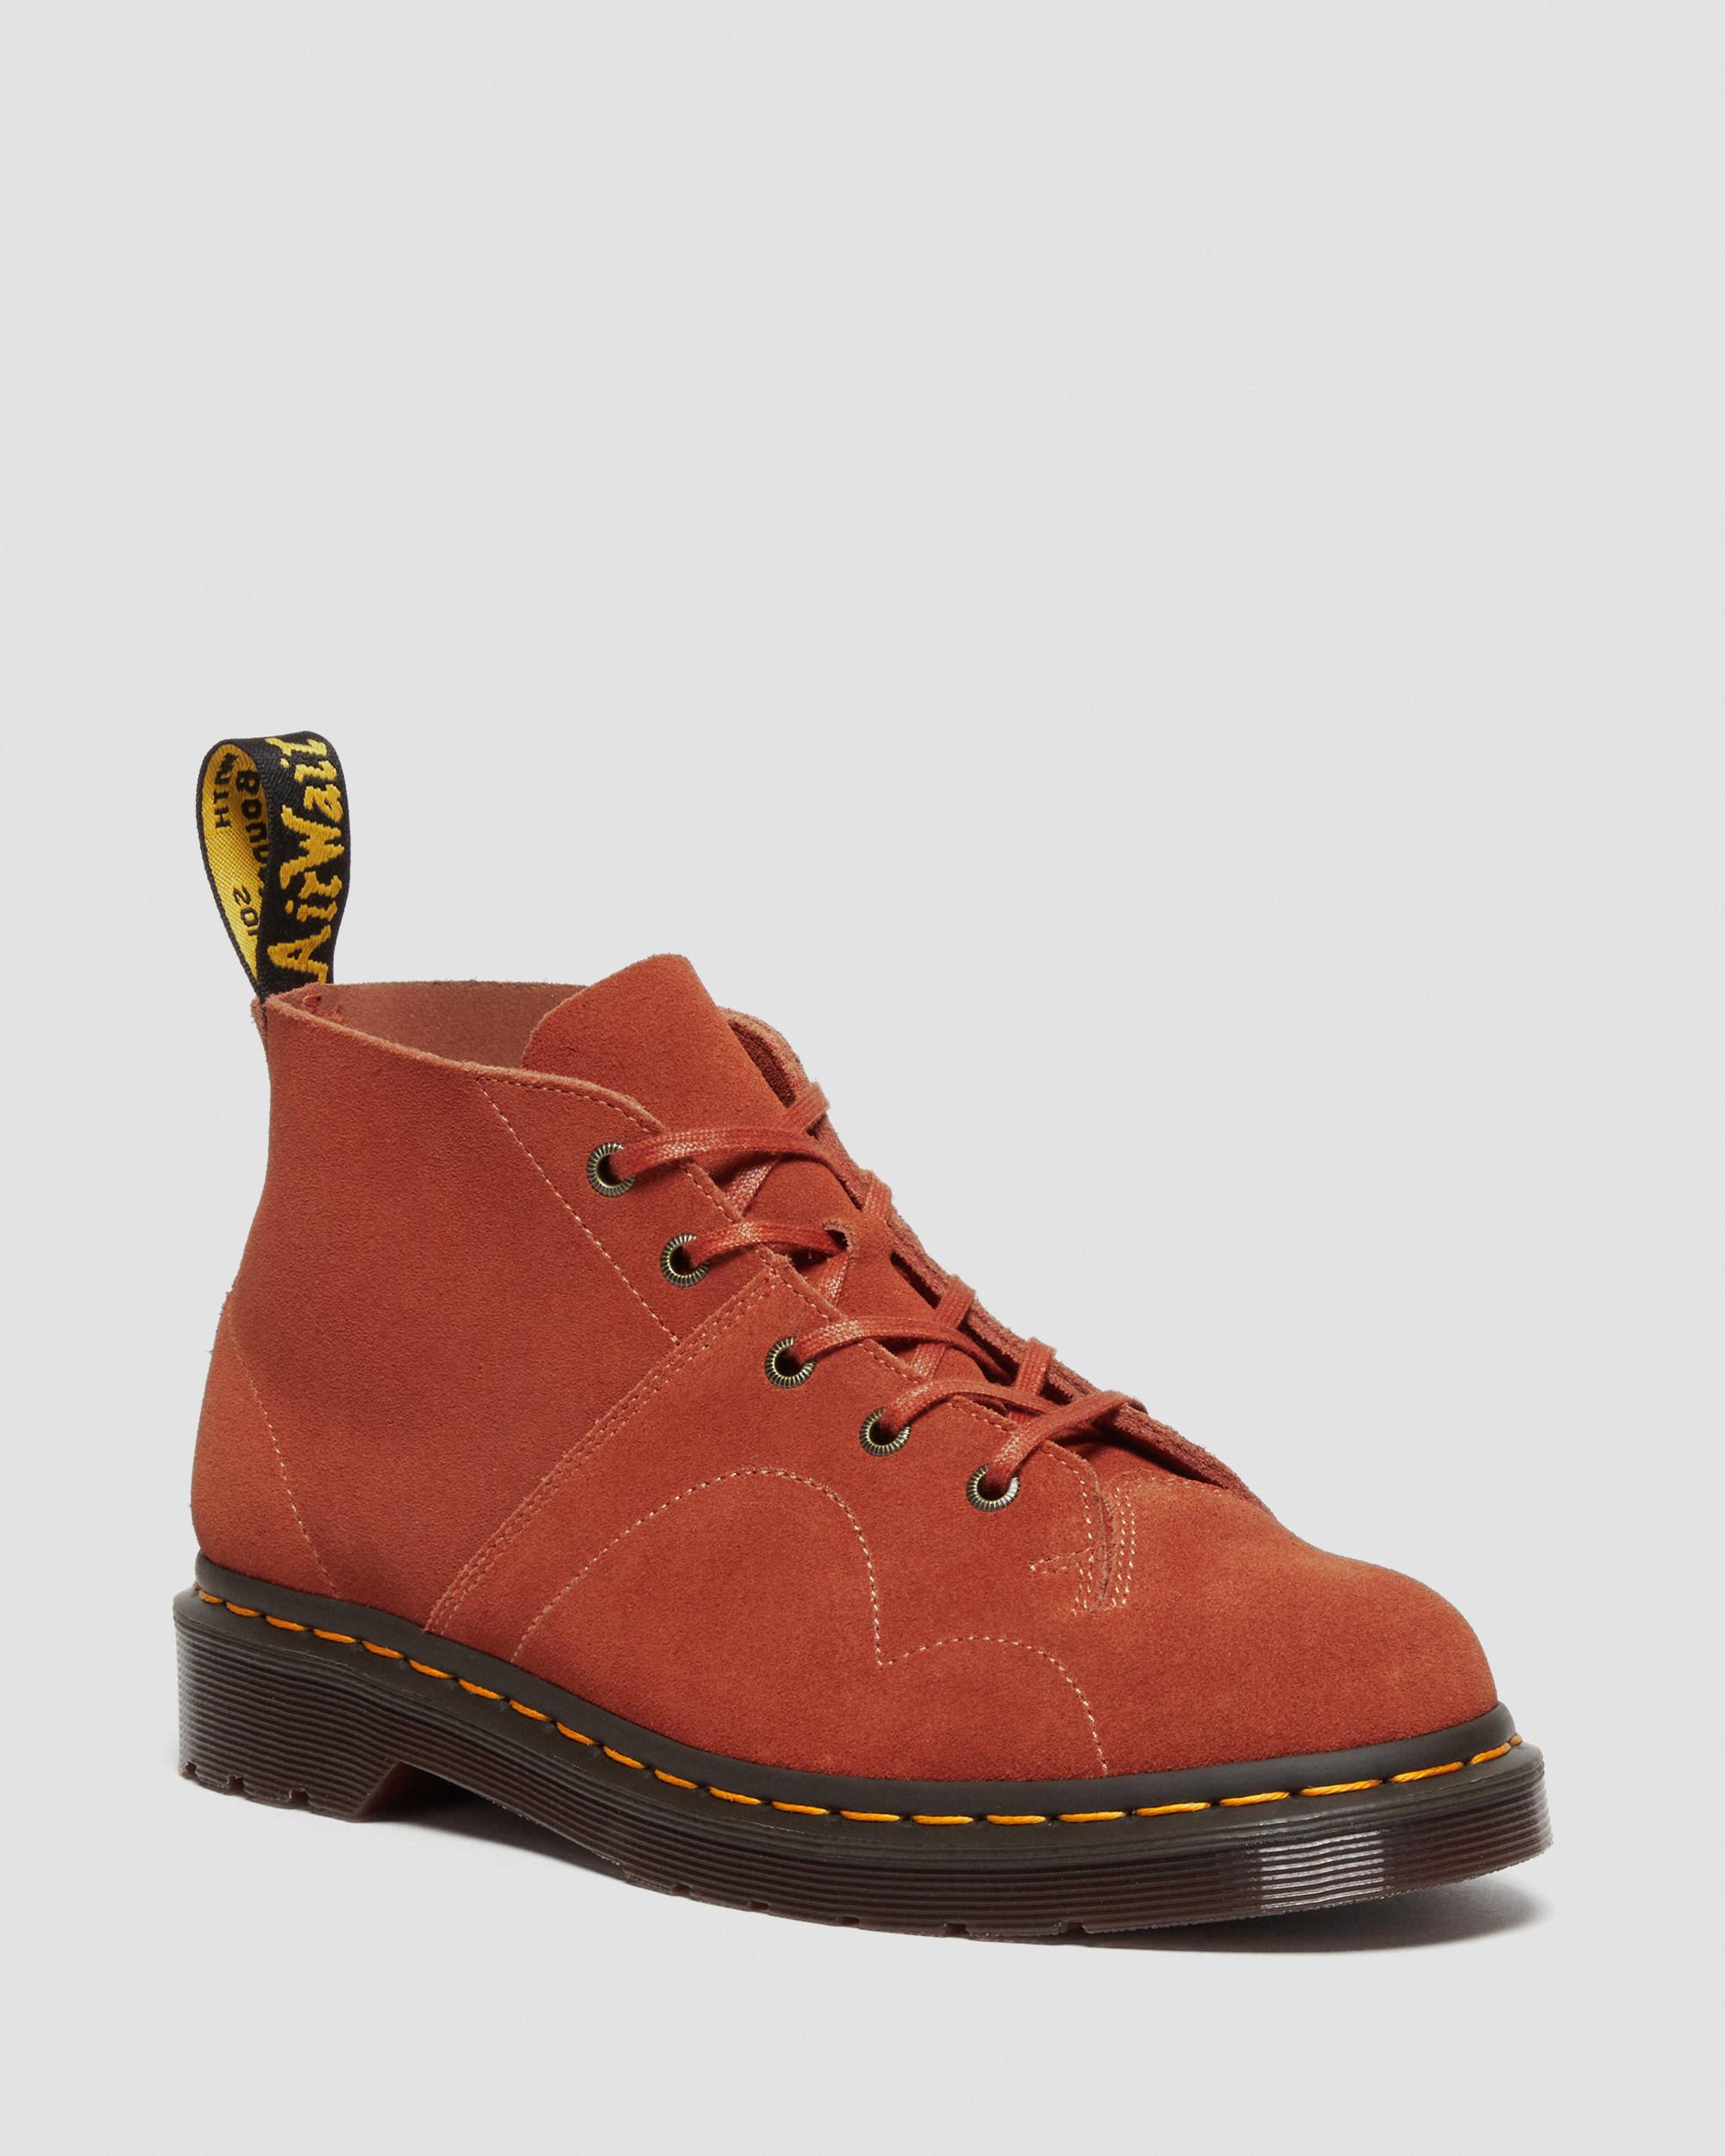 Church Suede Monkey Boots in Tan | Dr. Martens